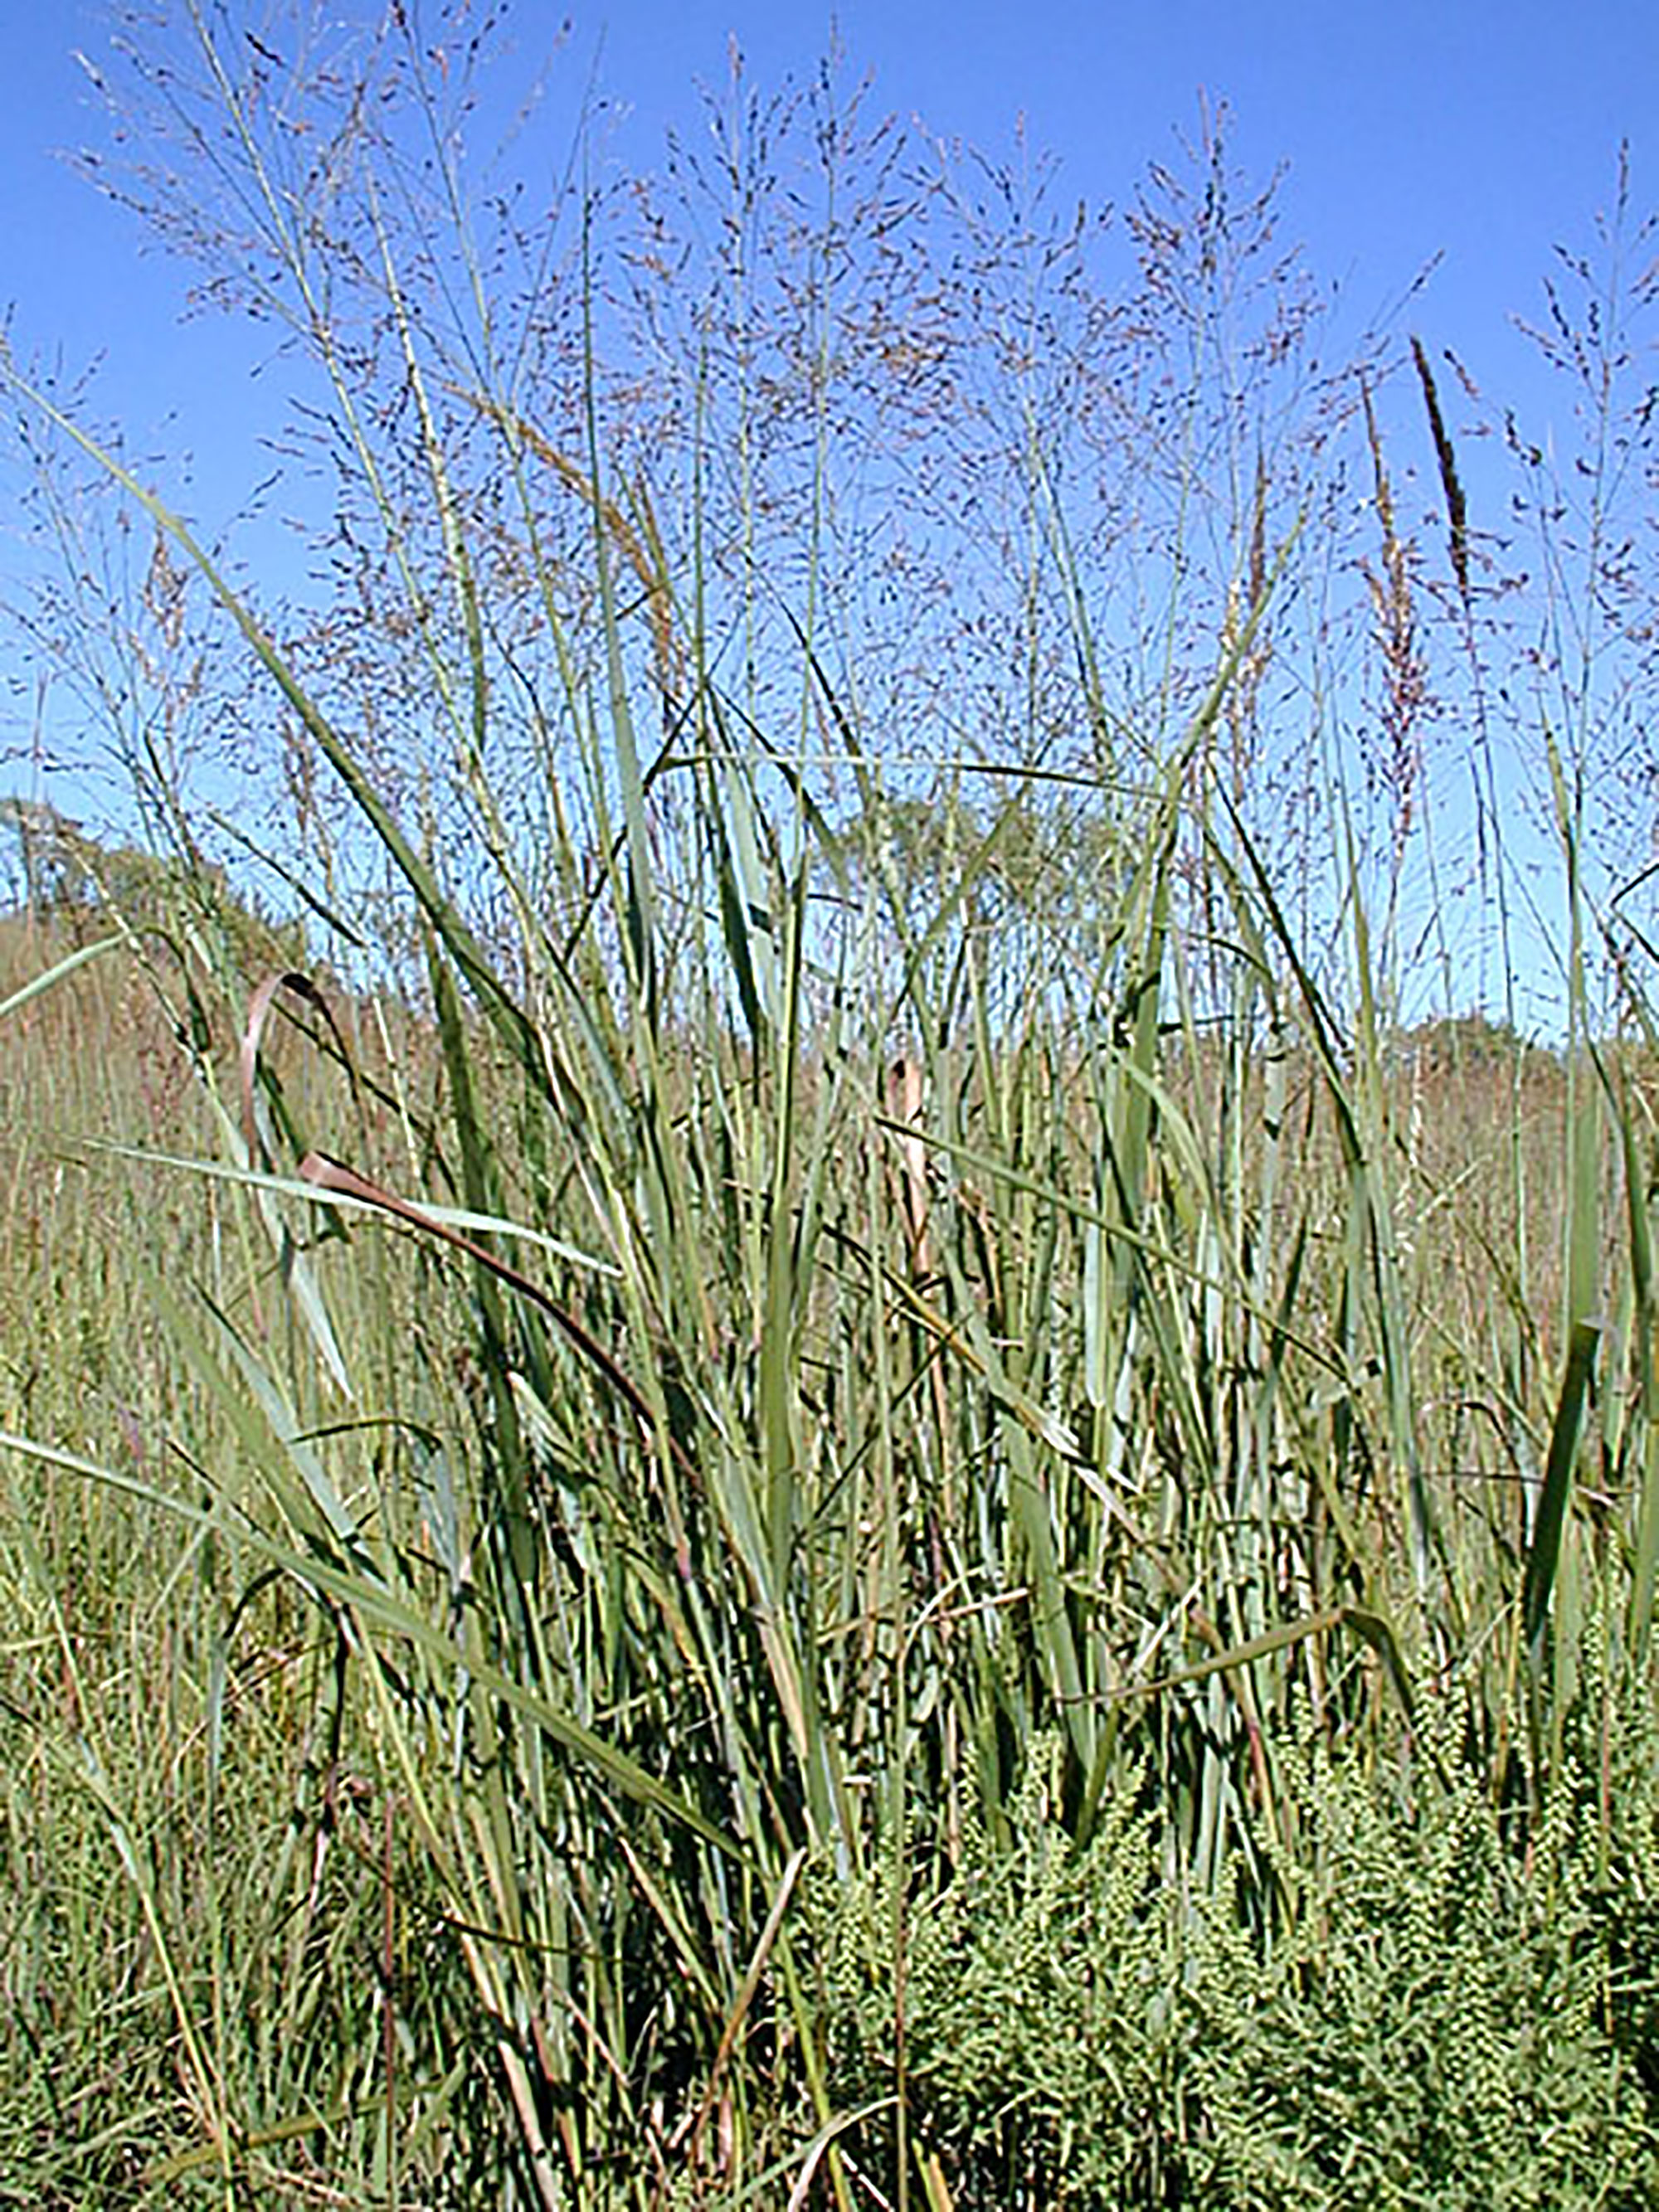 A patch of switchgrass growing at the edge of a field.